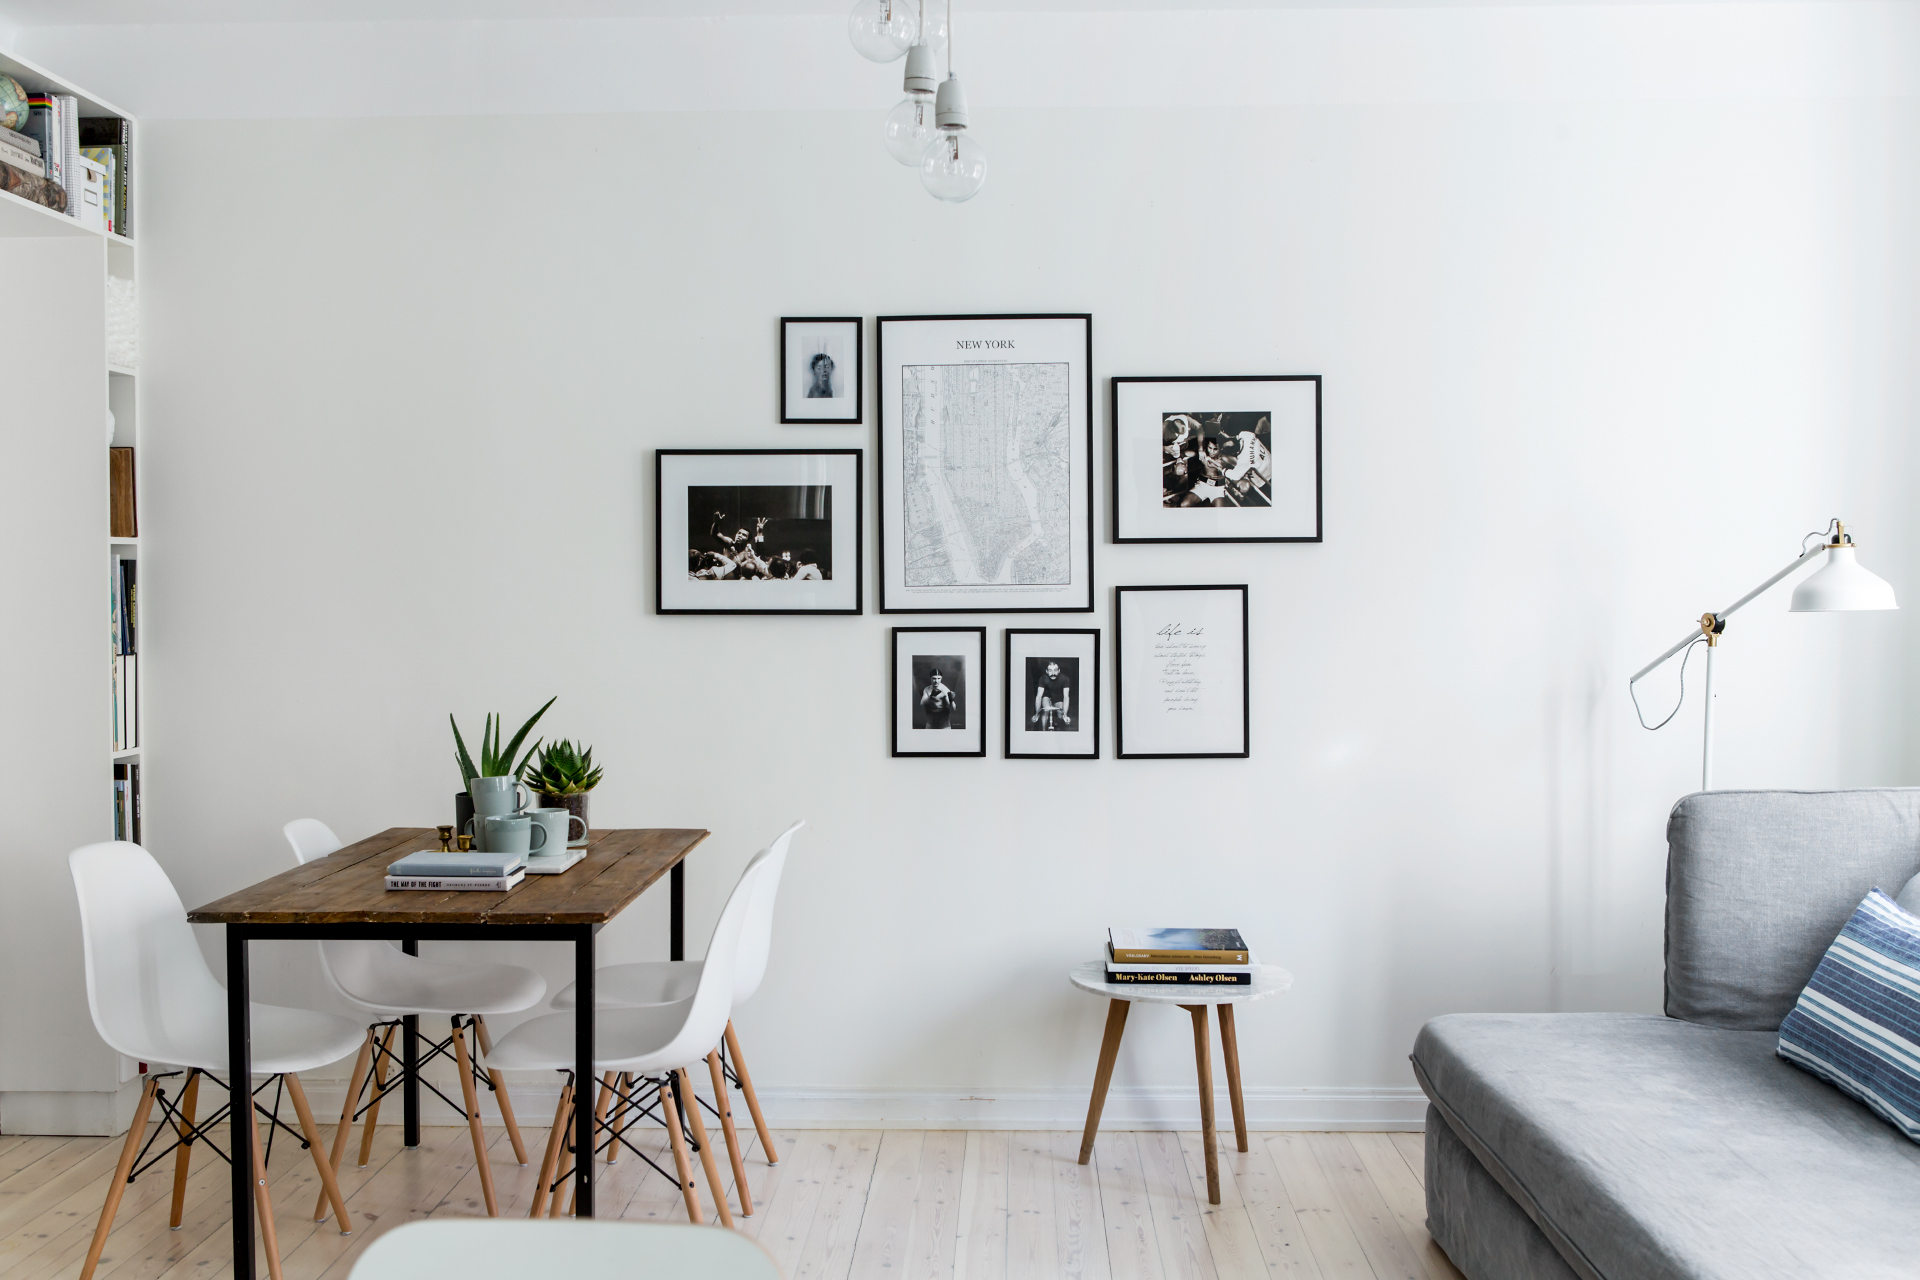 8 Design Lessons You Can Learn From Scandinavian Interiors